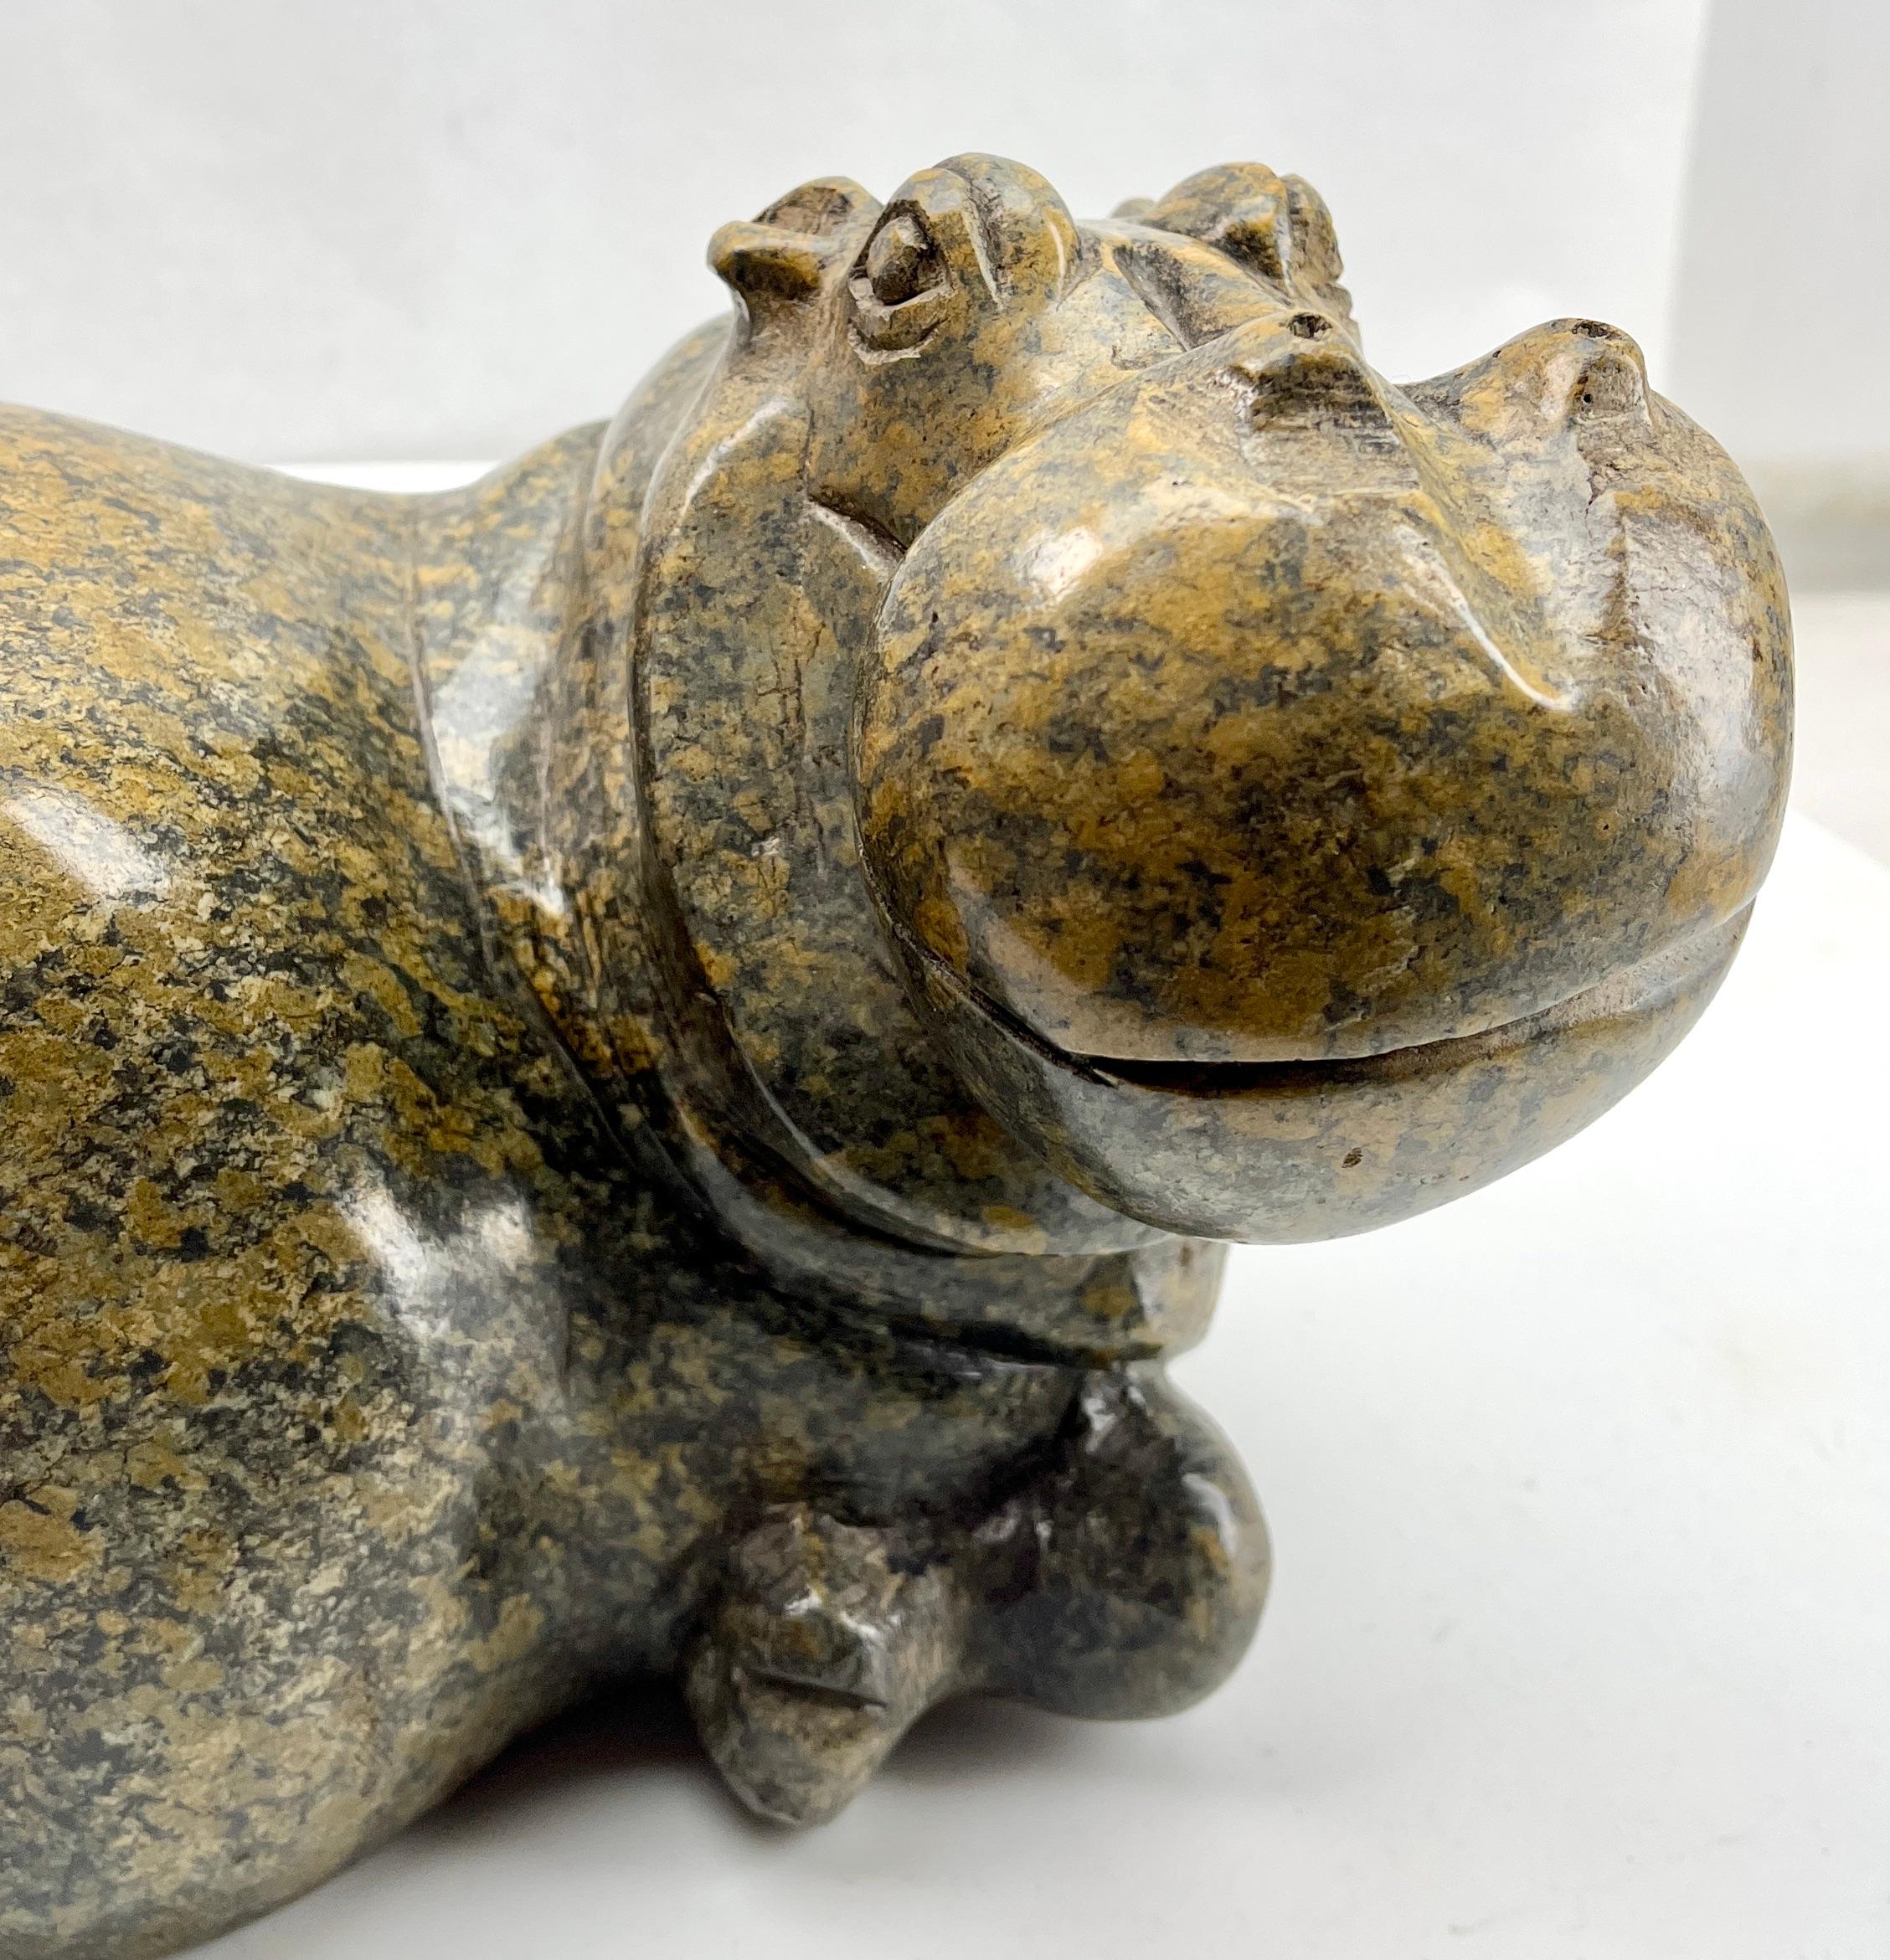 Signed By Thomas Mtasa with stylized  Of A Hippopotamus with Infant
Vintage  Inuit Malachite Carving Of A Hippopotamus with Infant
Kg 14
The piece is in Very Good and original condition and a real beauty!

Looks simply stunning.

By Thomas Mtasa